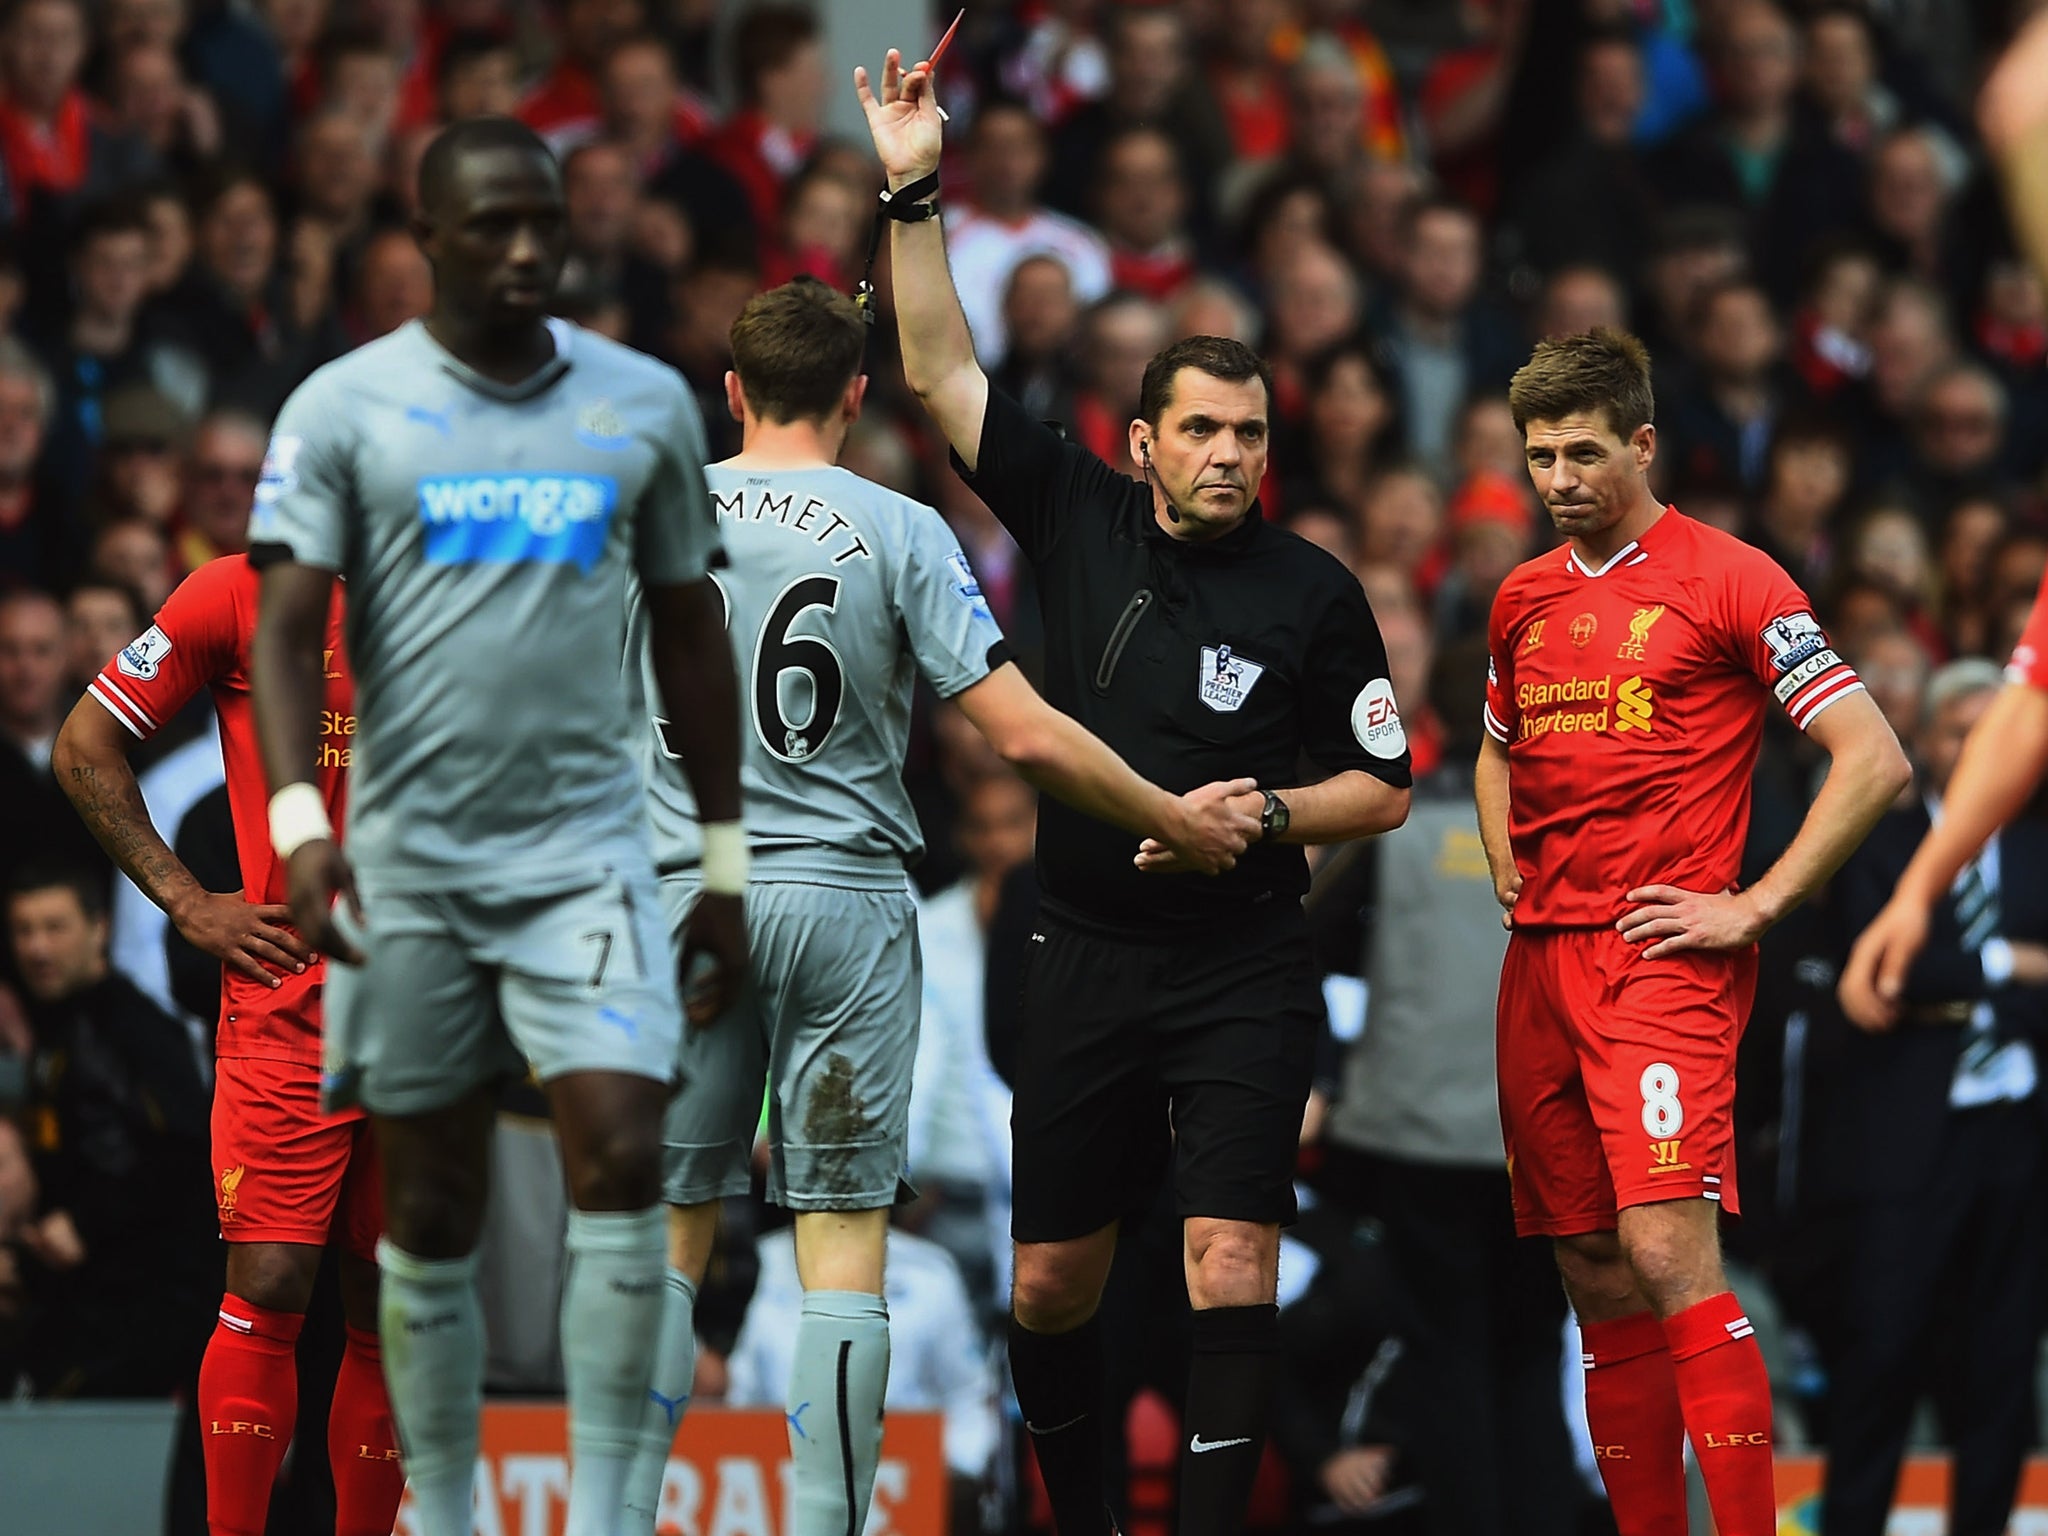 Paul Dummett of Newcastle United is sent off referee Phil Dowd during the Barclays Premier League match between Liverpool and Newcastle United at Anfield